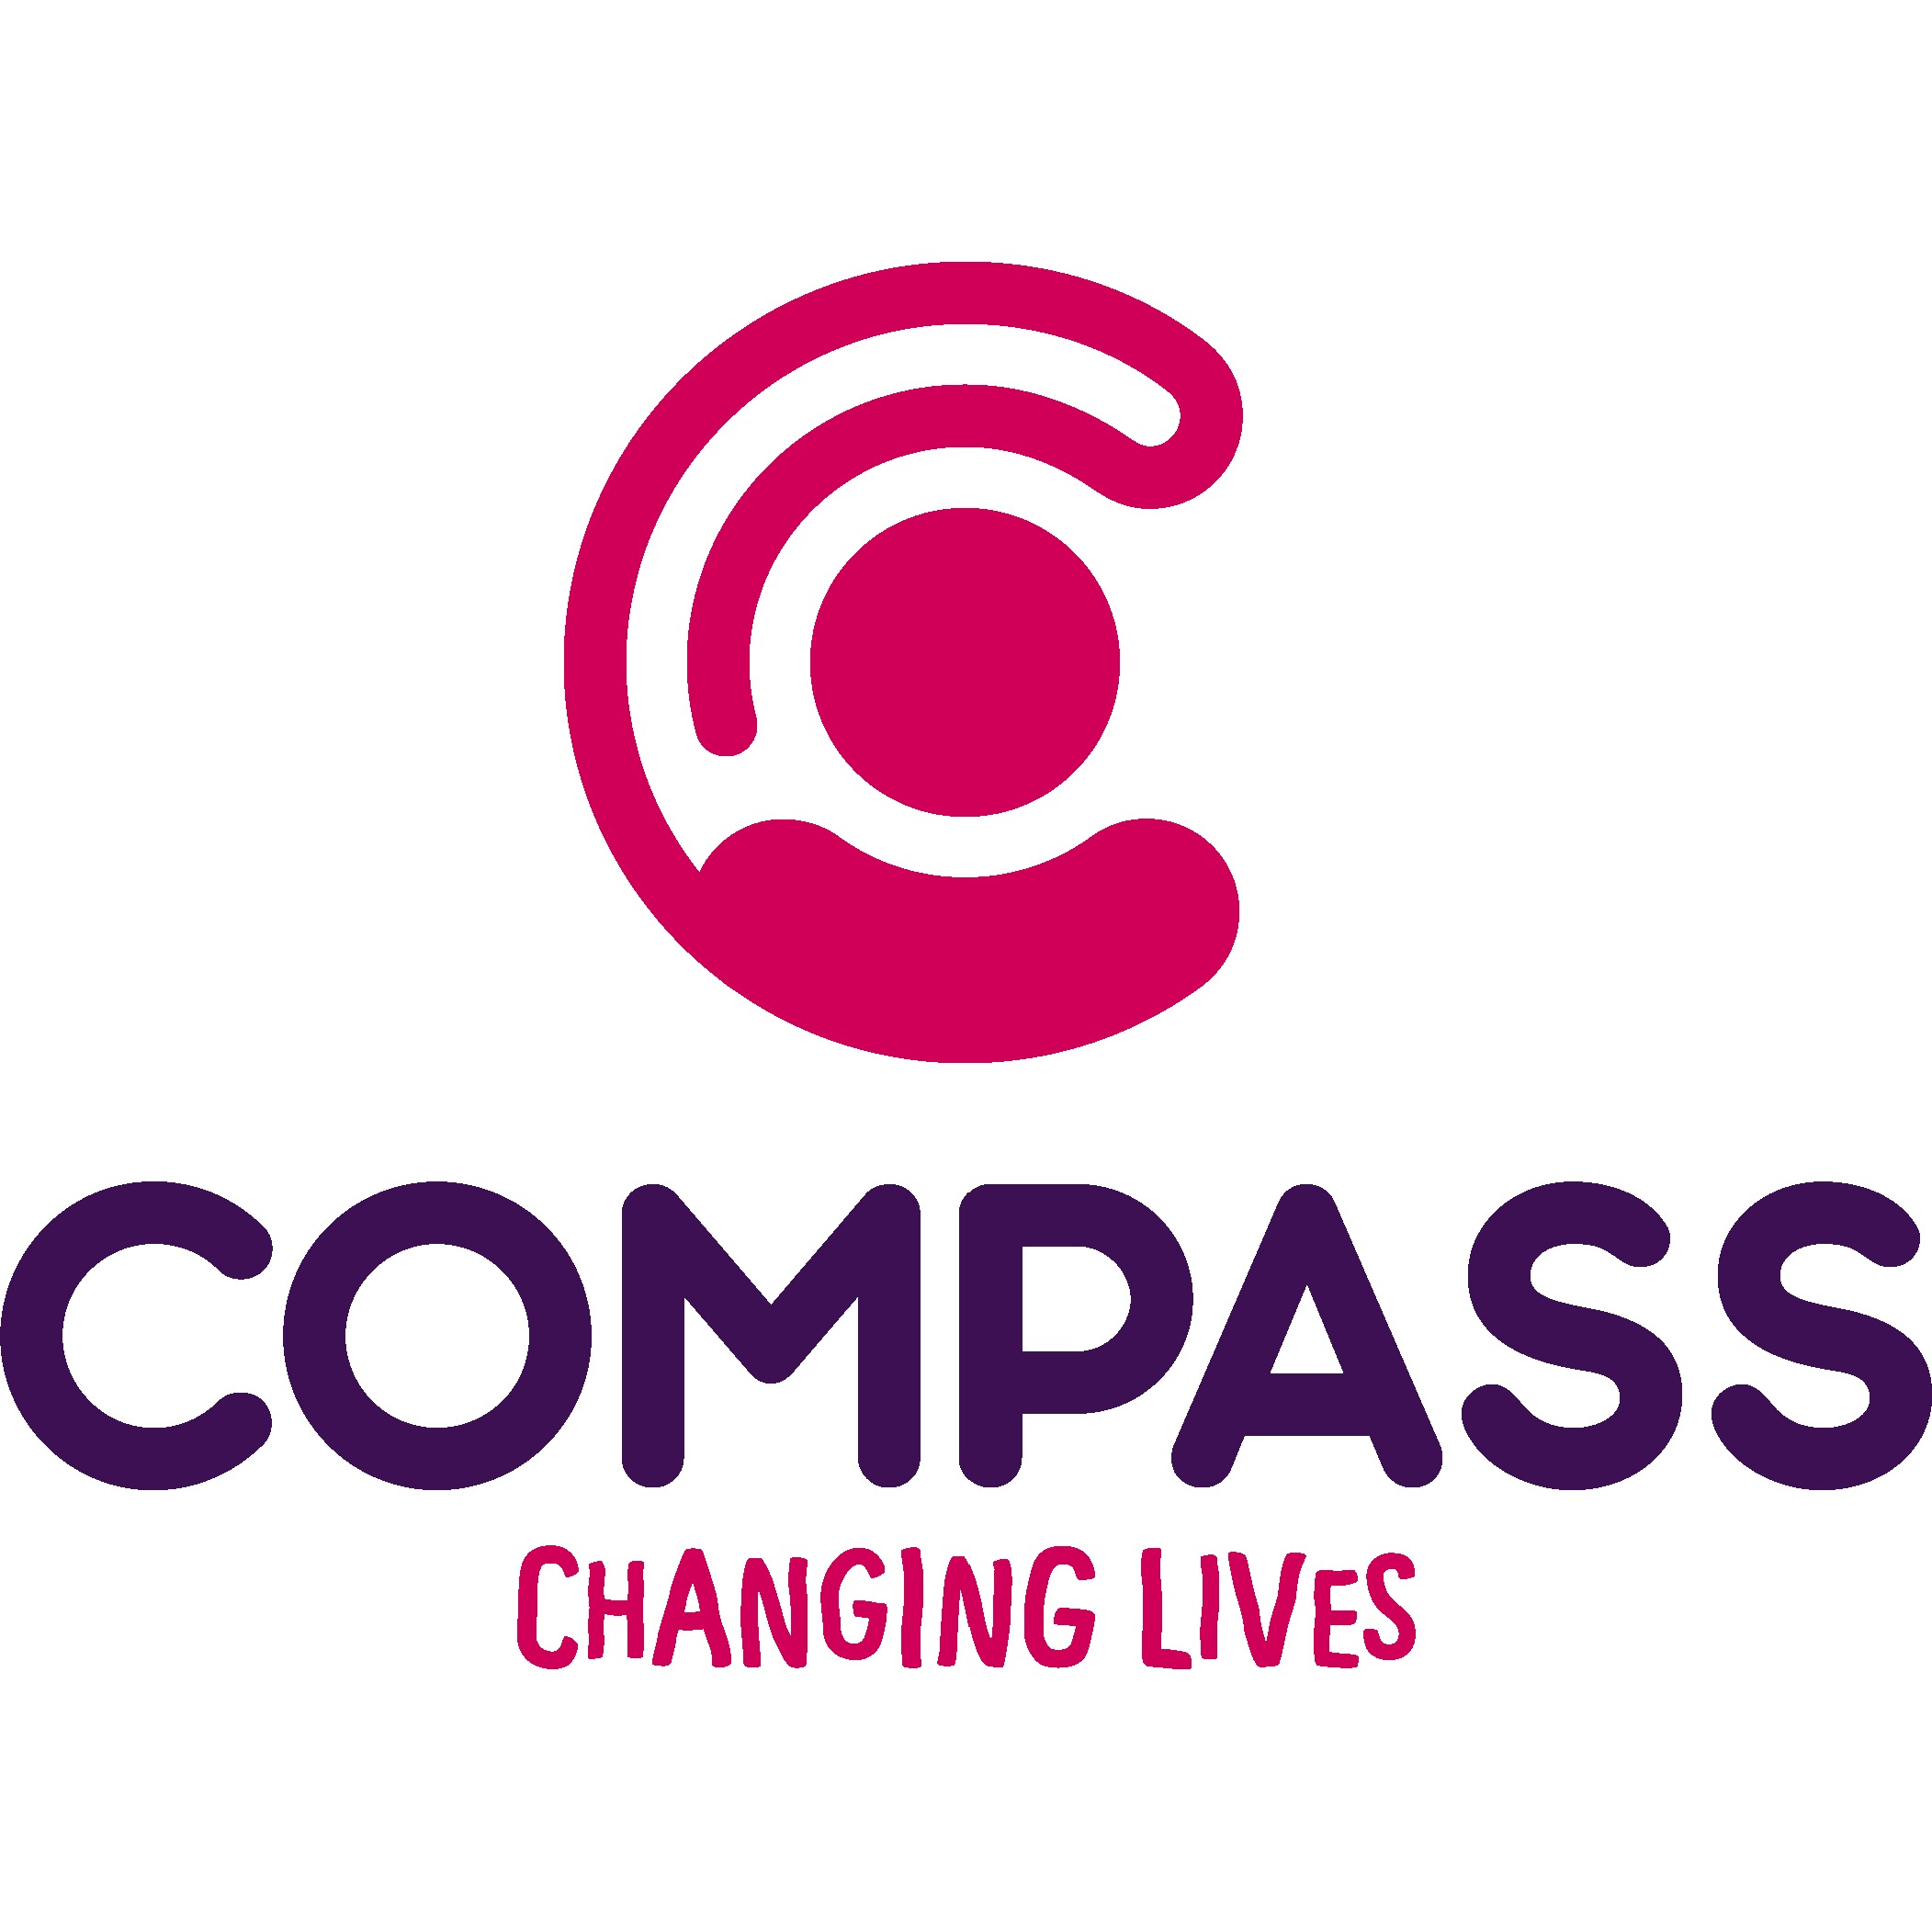 Compass Changing Lives - Compass